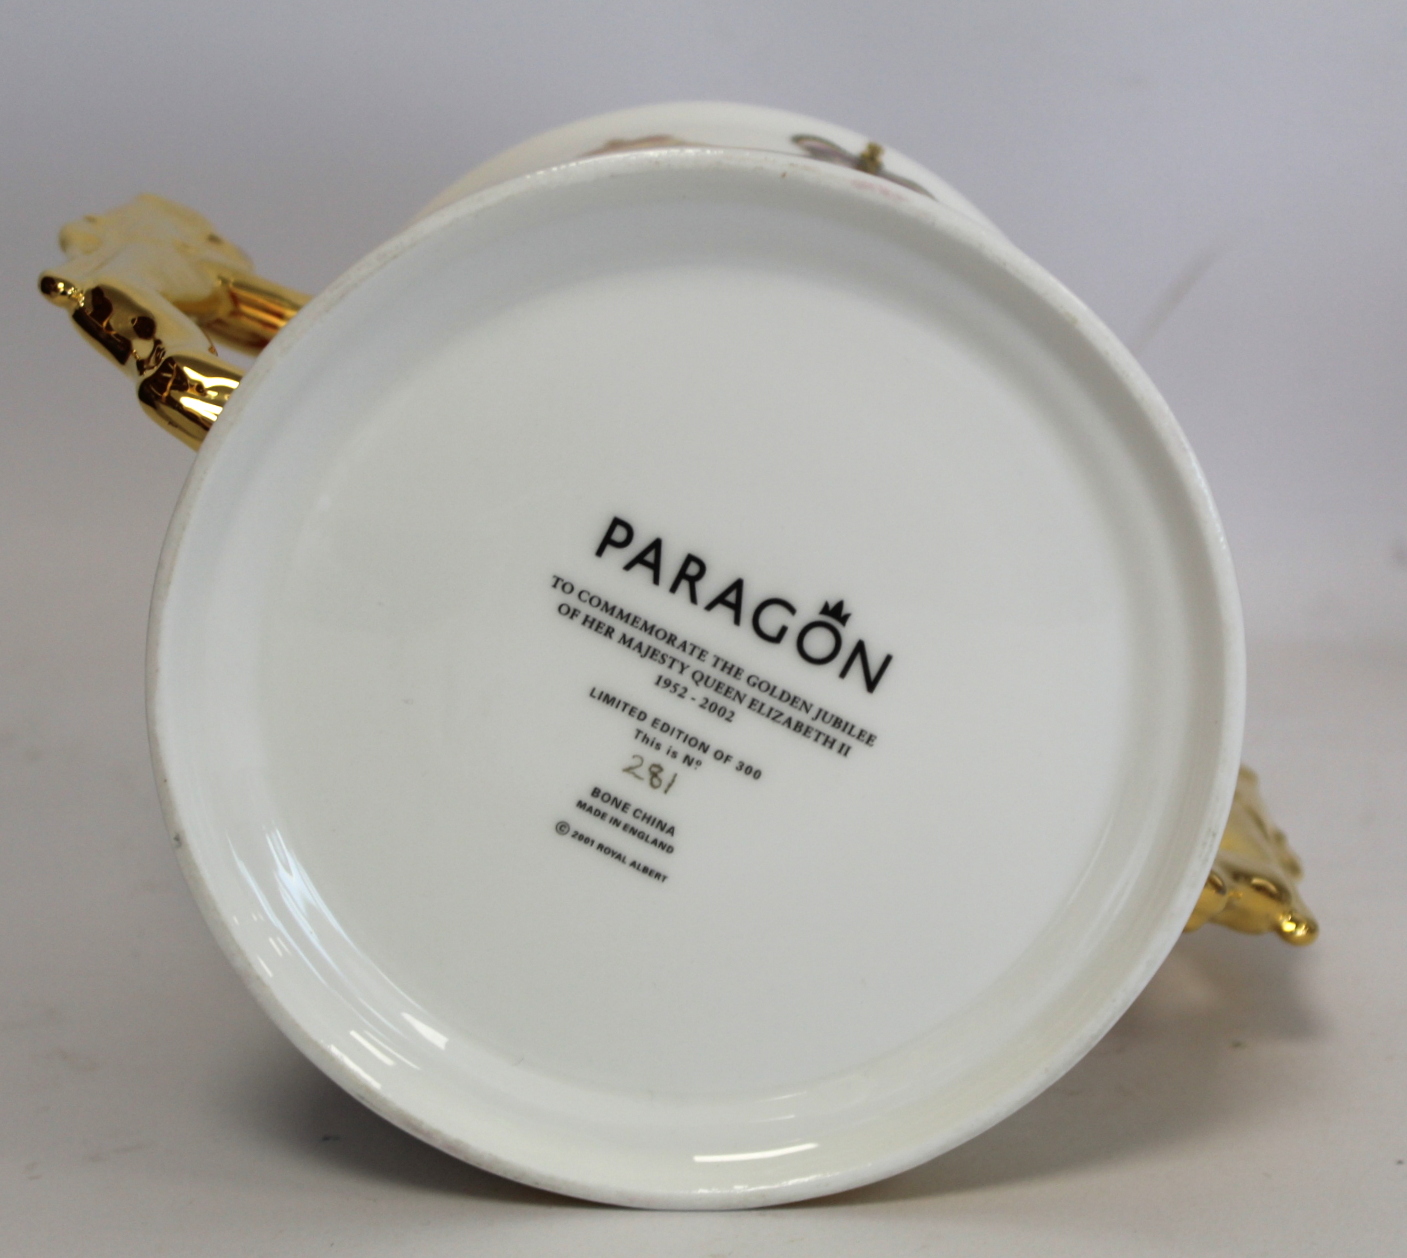 Large Paragon commemorative bone china loving cup for the Golden Jubilee 2002, limited edition no. - Bild 4 aus 8